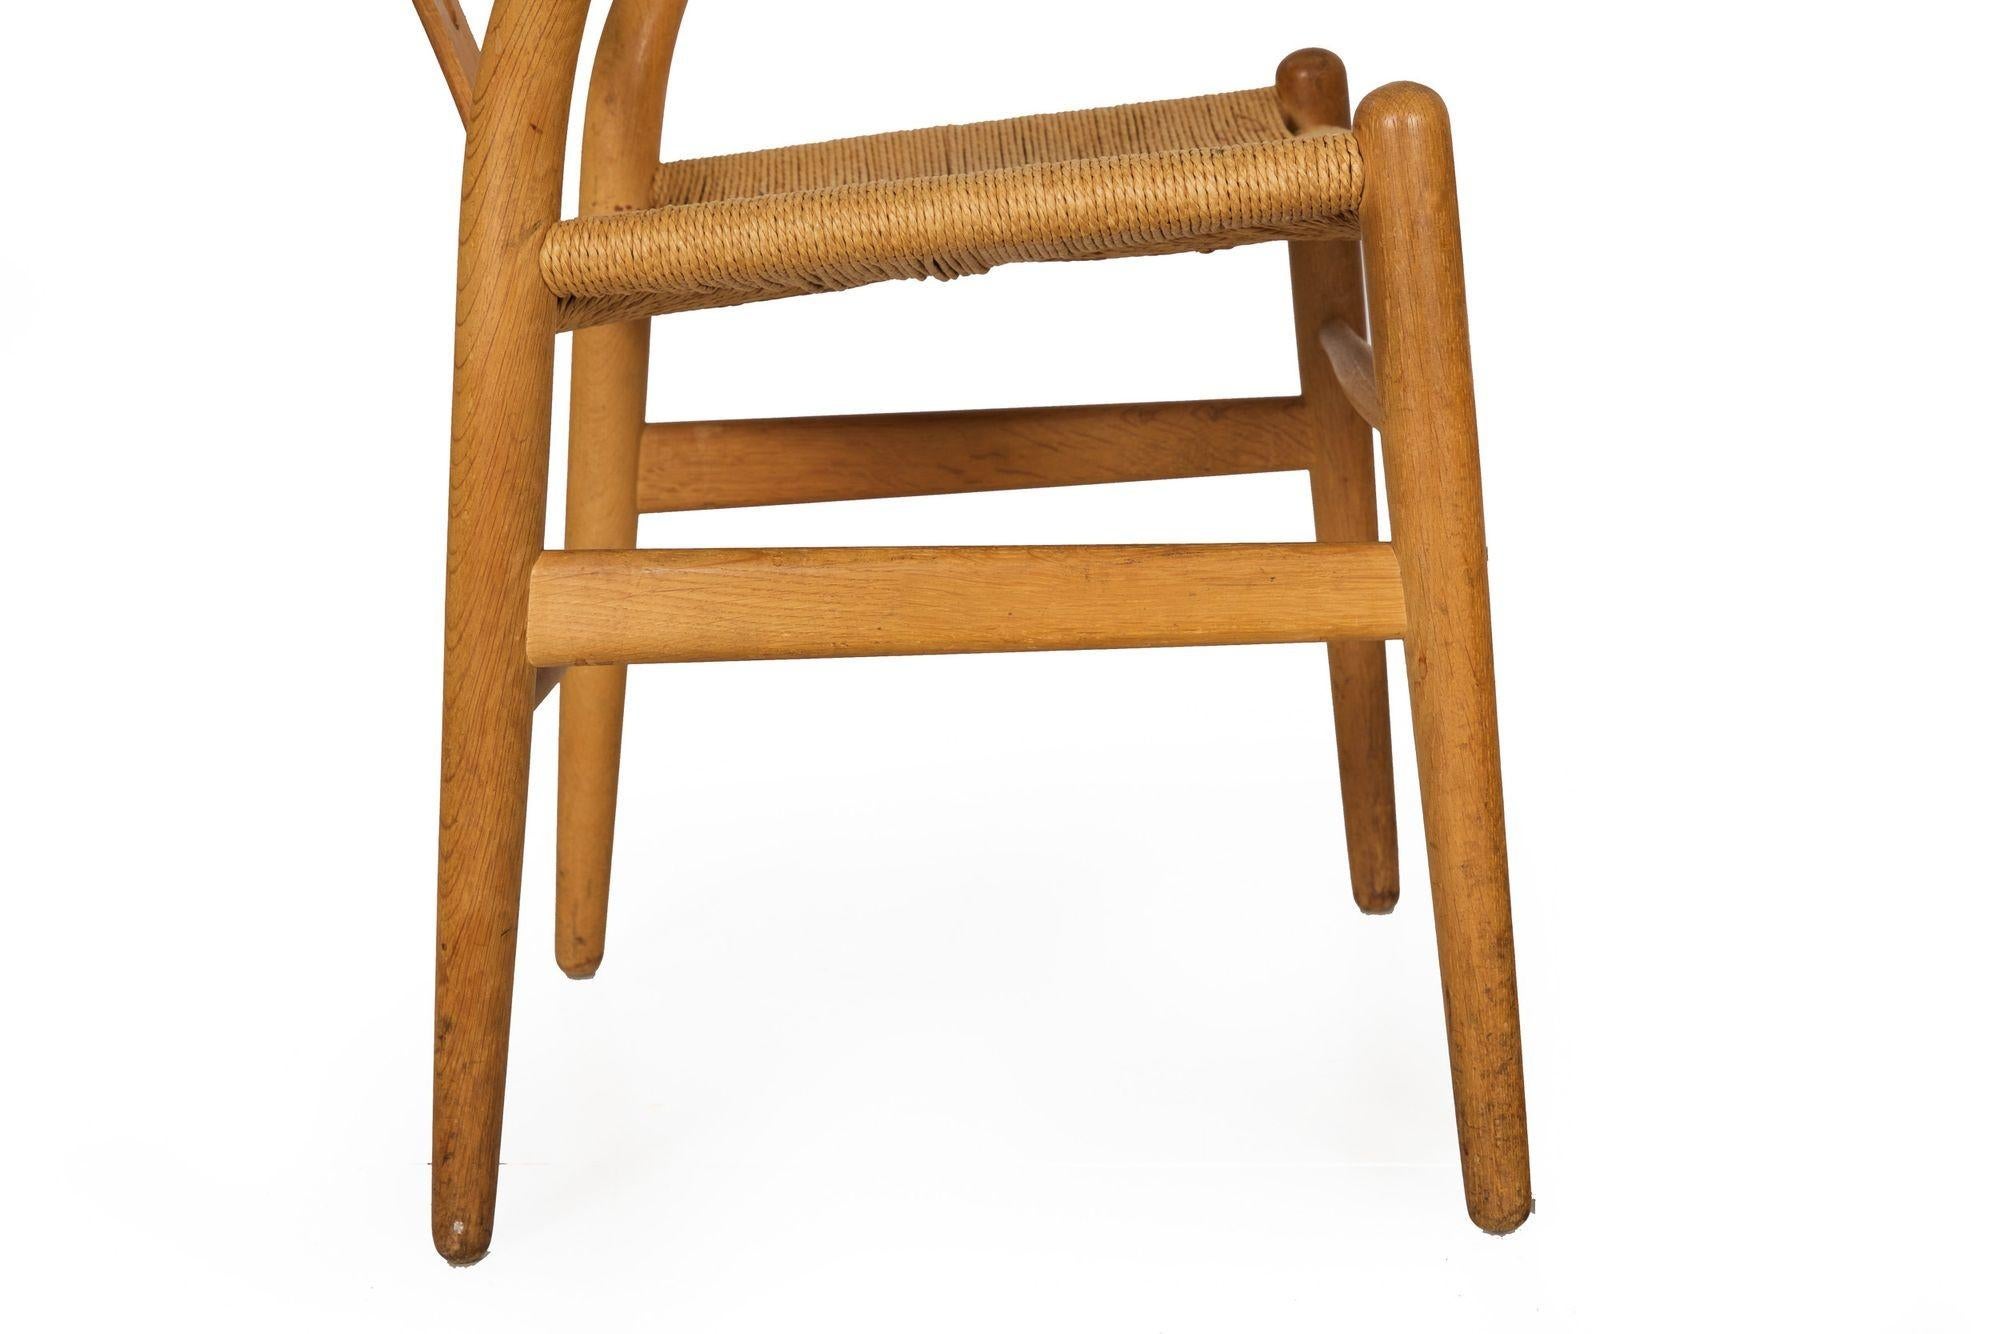 Pair of Patinated Oak “Wishbone” Arm Chairs by Hans Wegner circa 1960s For Sale 6